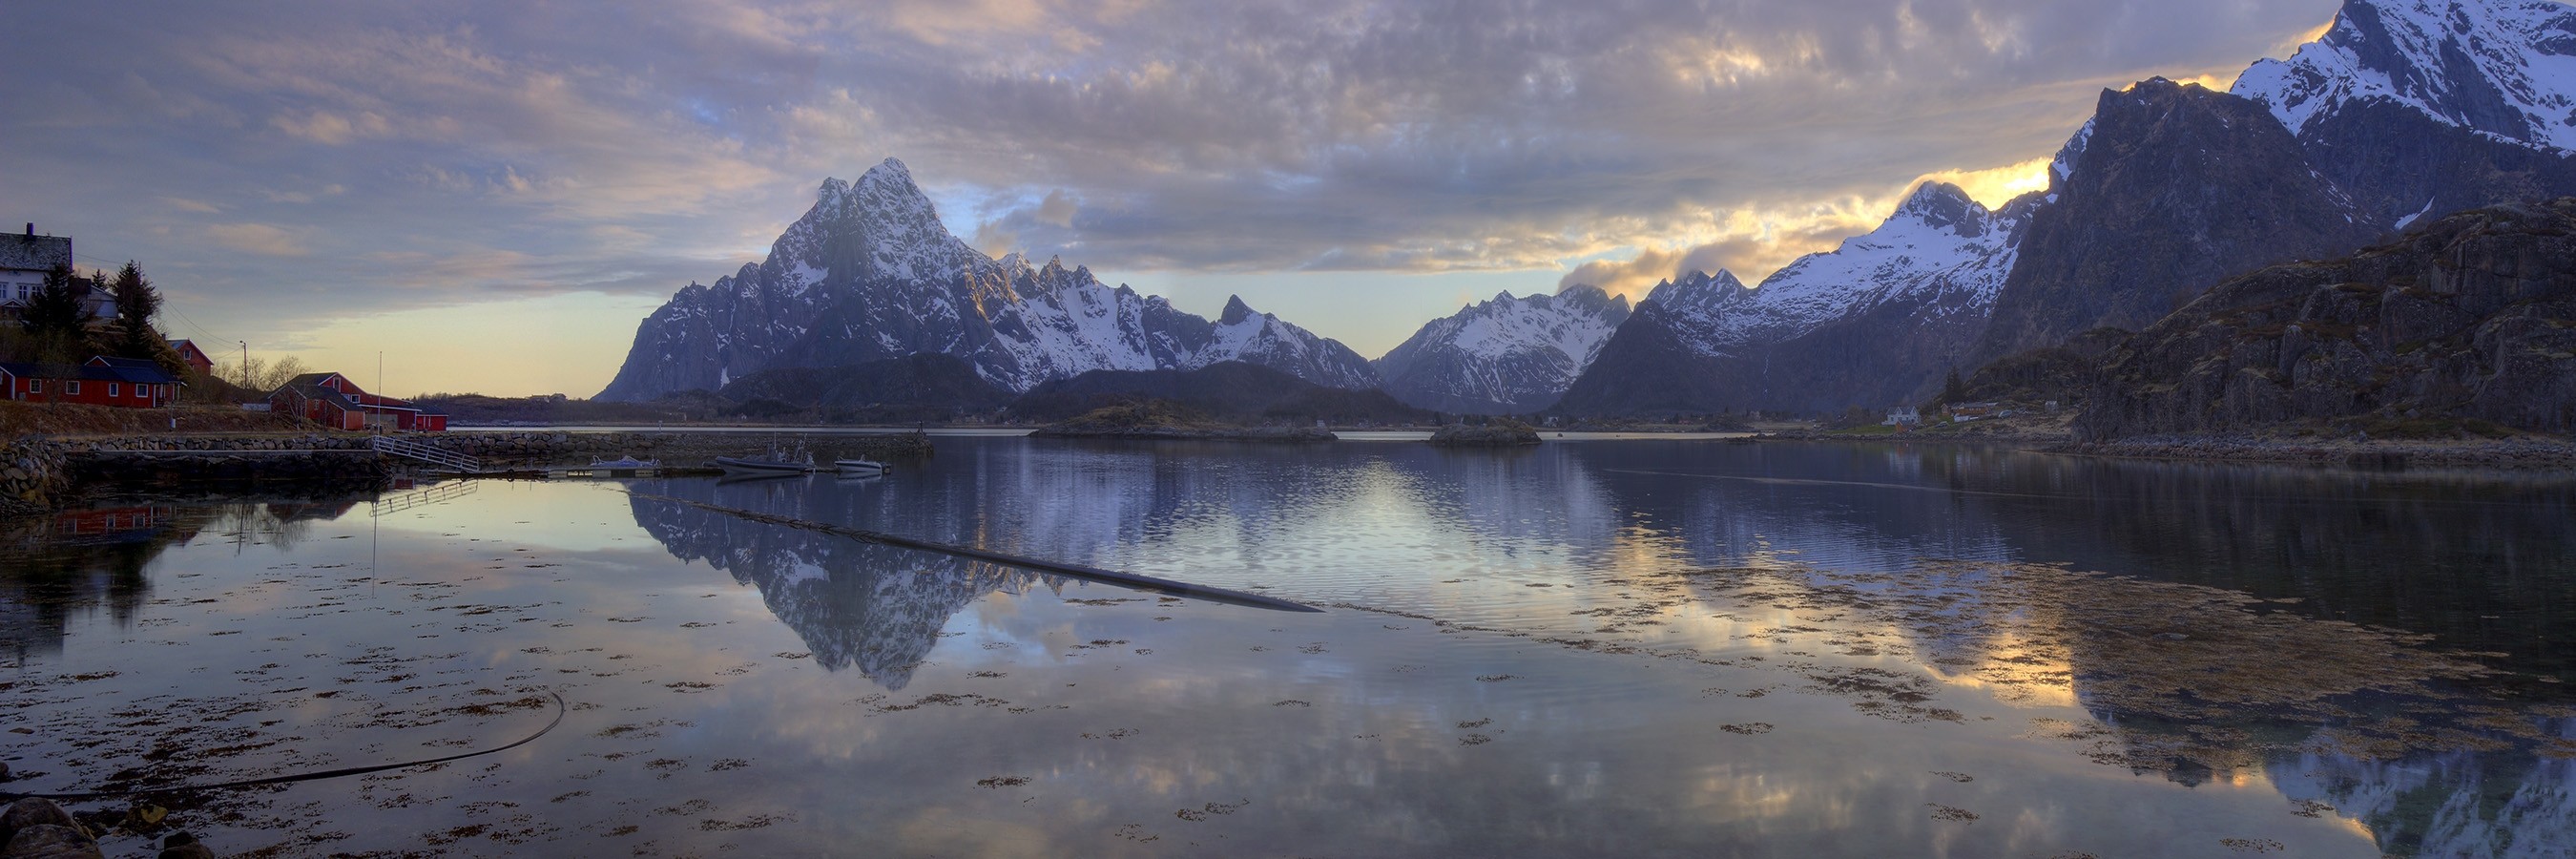 General 2700x900 landscape nature photography panorama mountains fjord clouds morning sunlight snowy peak Lofoten Norway reflection nordic landscapes